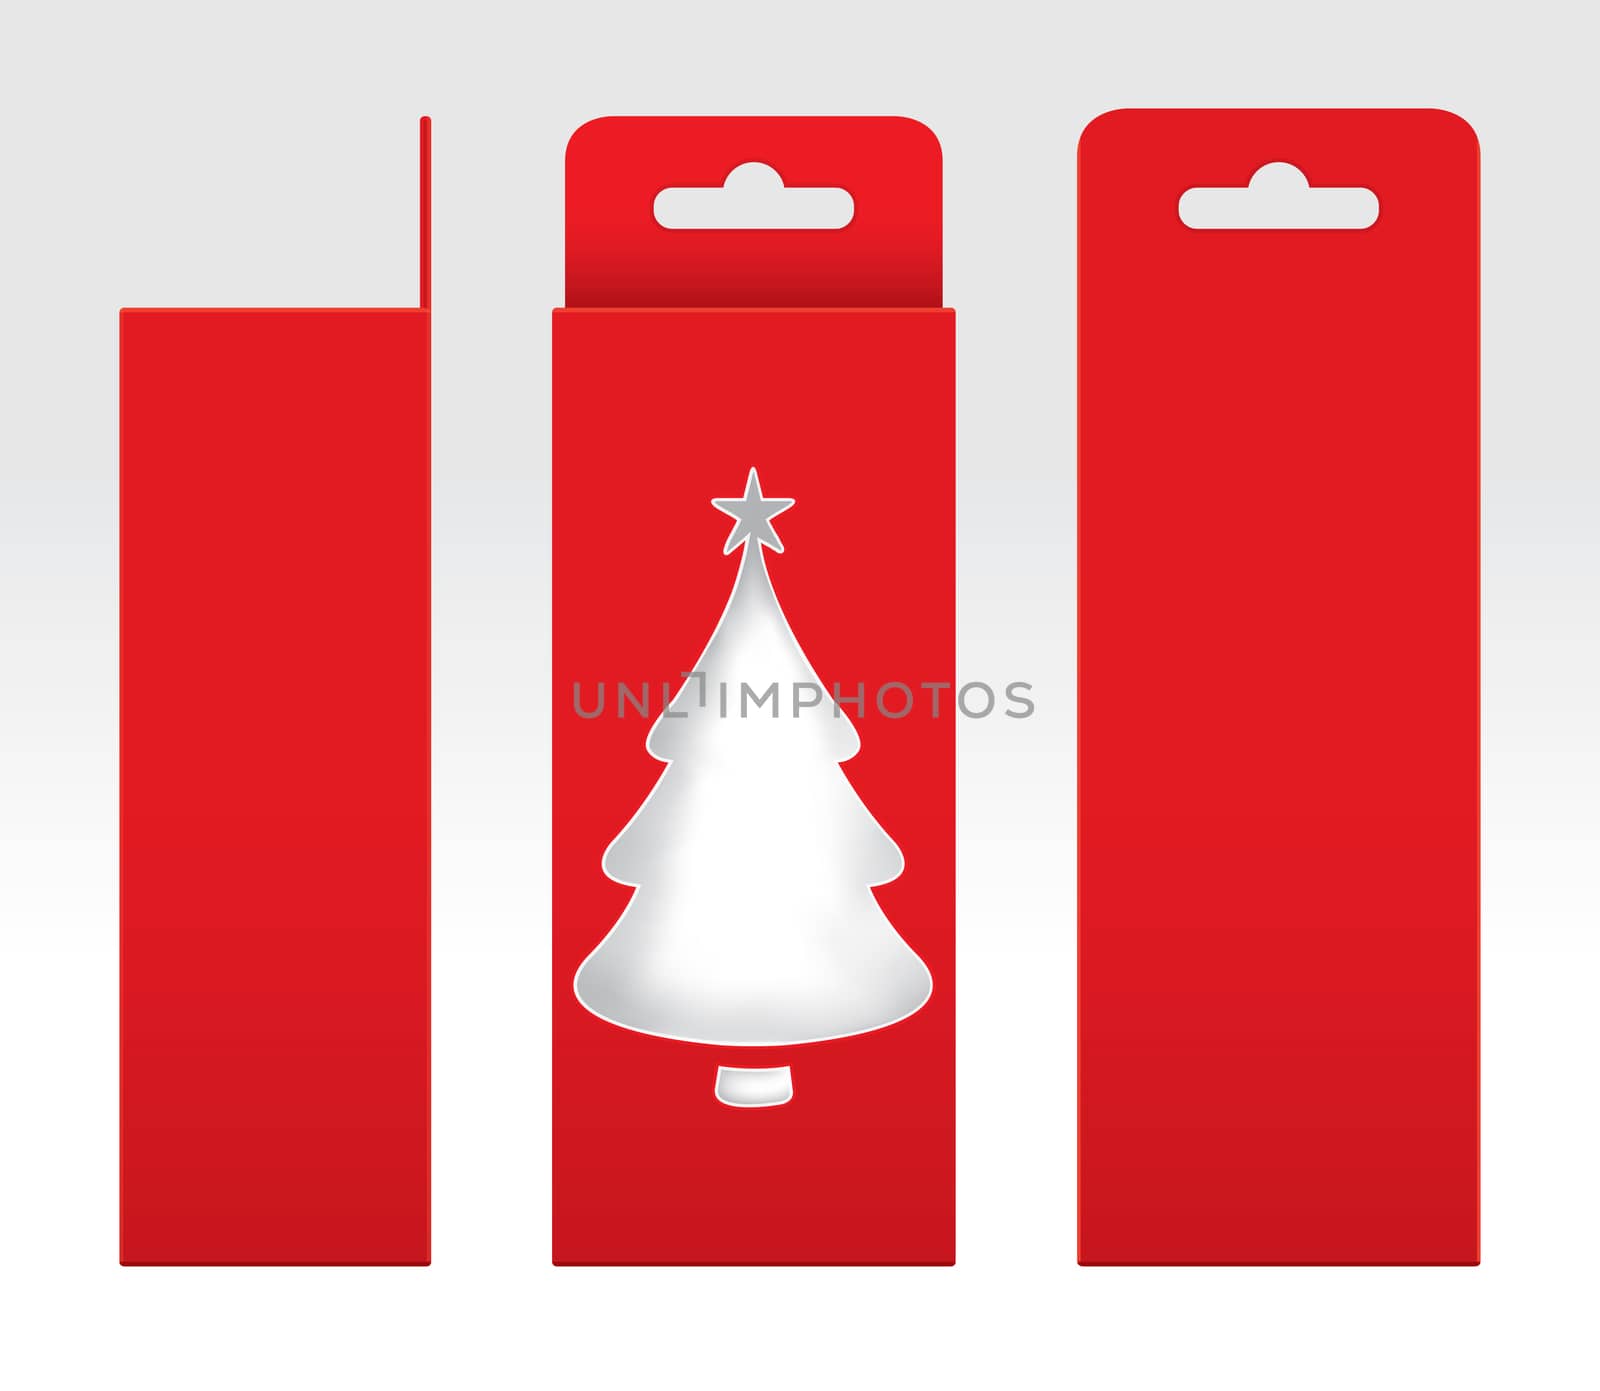 Hanging Red Box window Christmas tree shape cut out Packaging Template blank, Empty Box red Cardboard, Gift Boxes red kraft Package Carton by cgdeaw